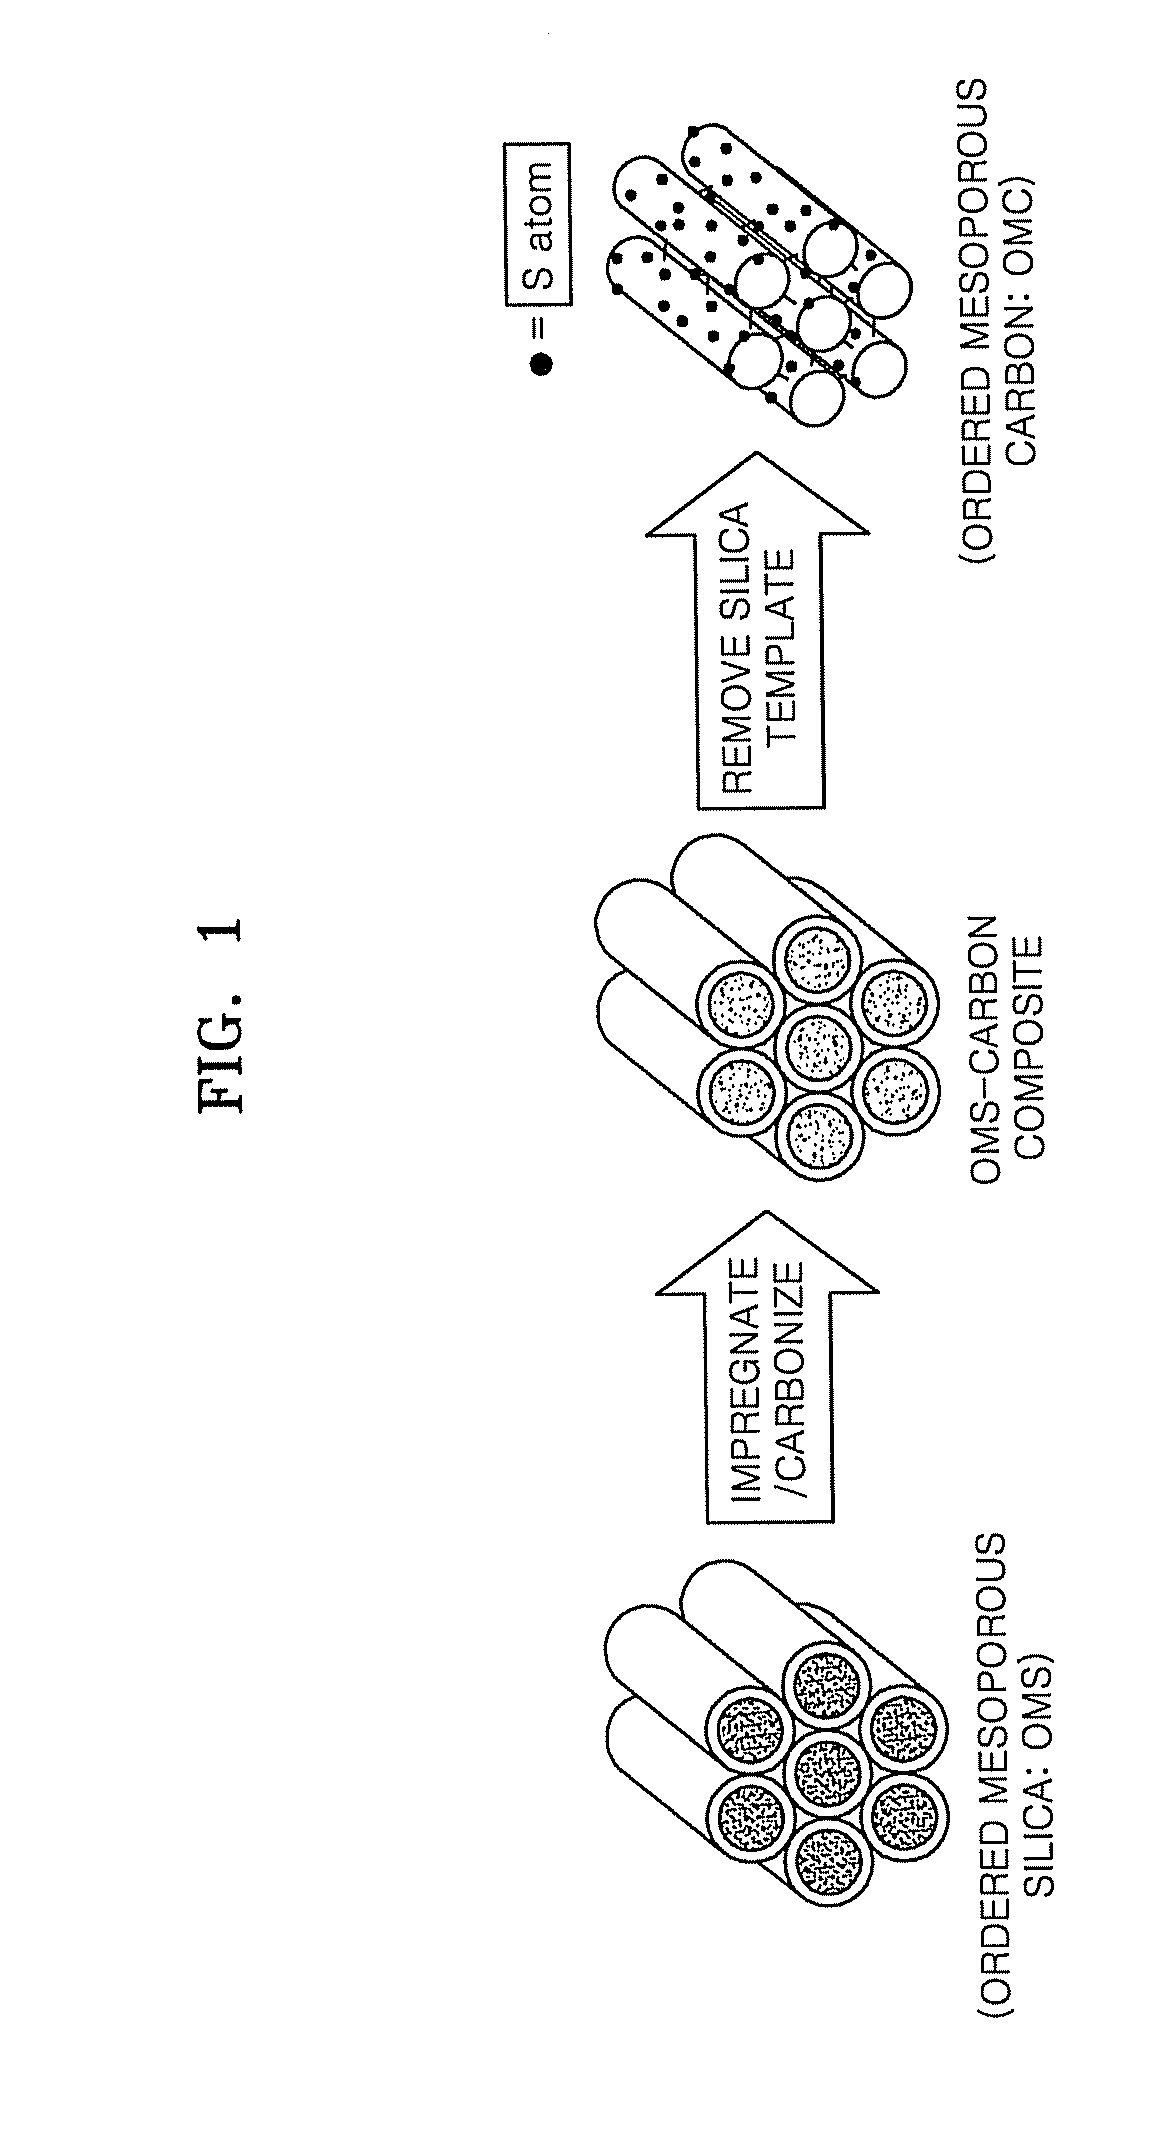 Sulfur-containing mesoporous carbon, method of manufacturing the same, and fuel cell using the mesoporous carbon